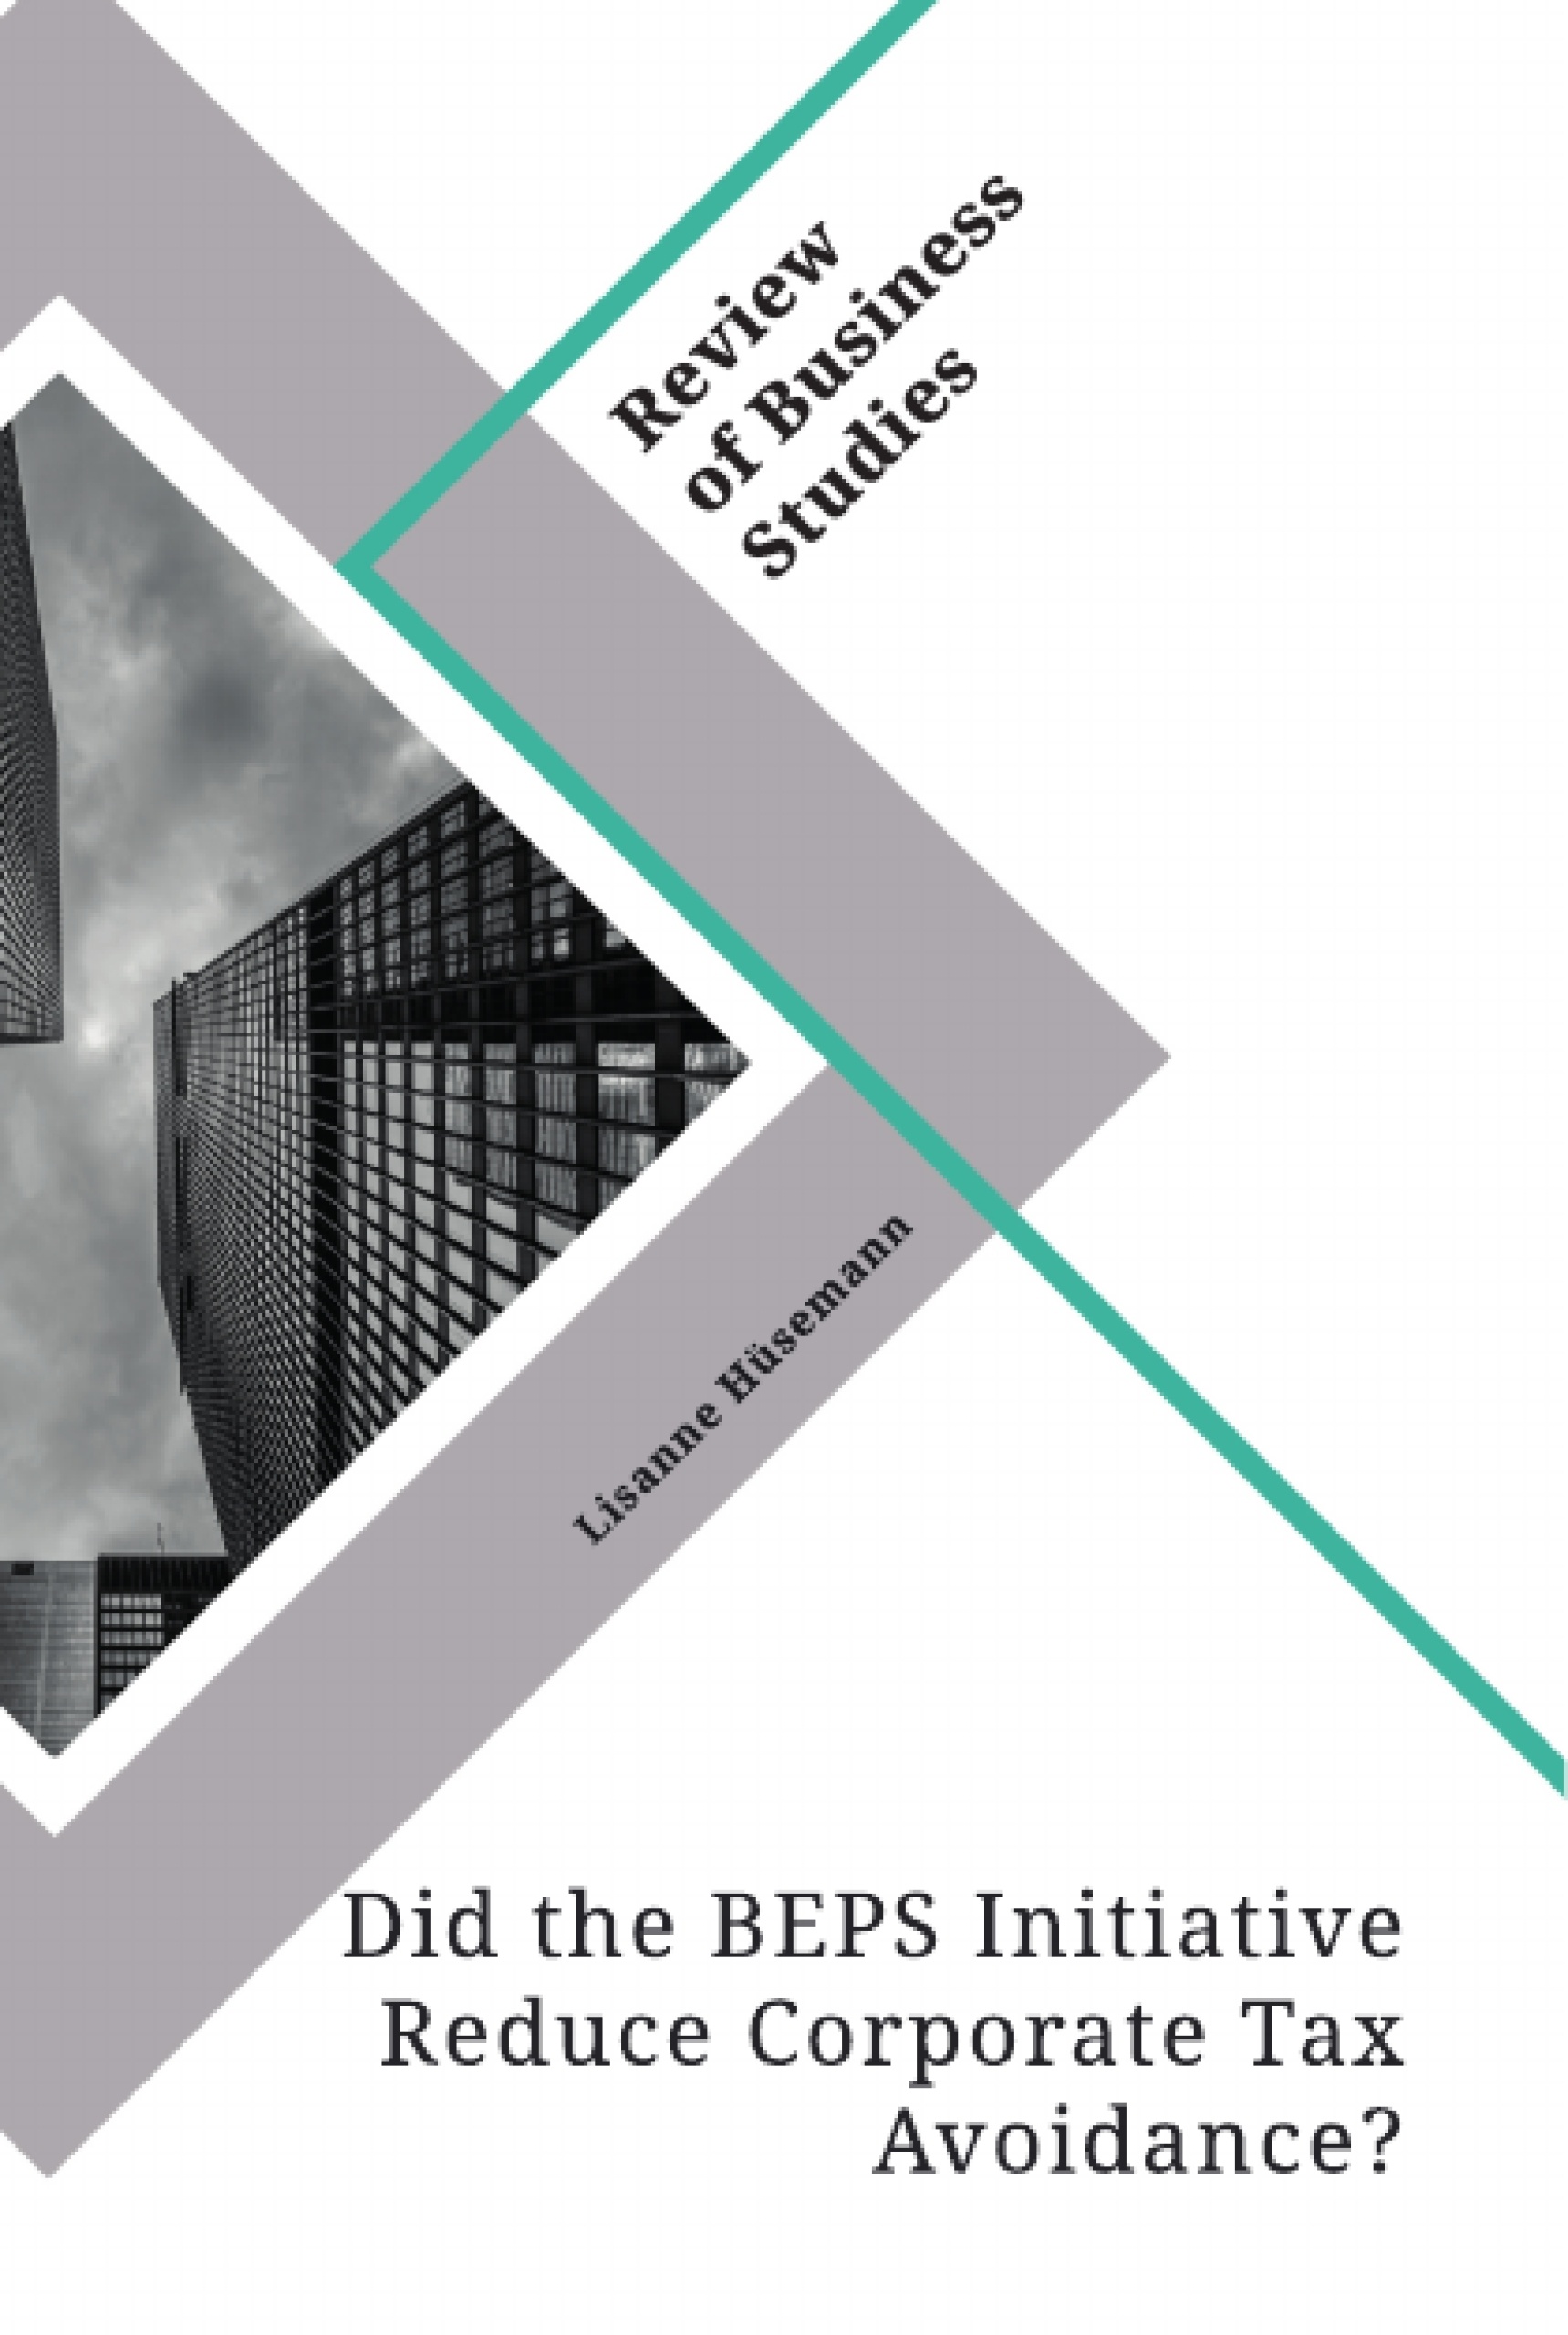 Title: Did the BEPS Initiative Reduce Corporate Tax Avoidance?